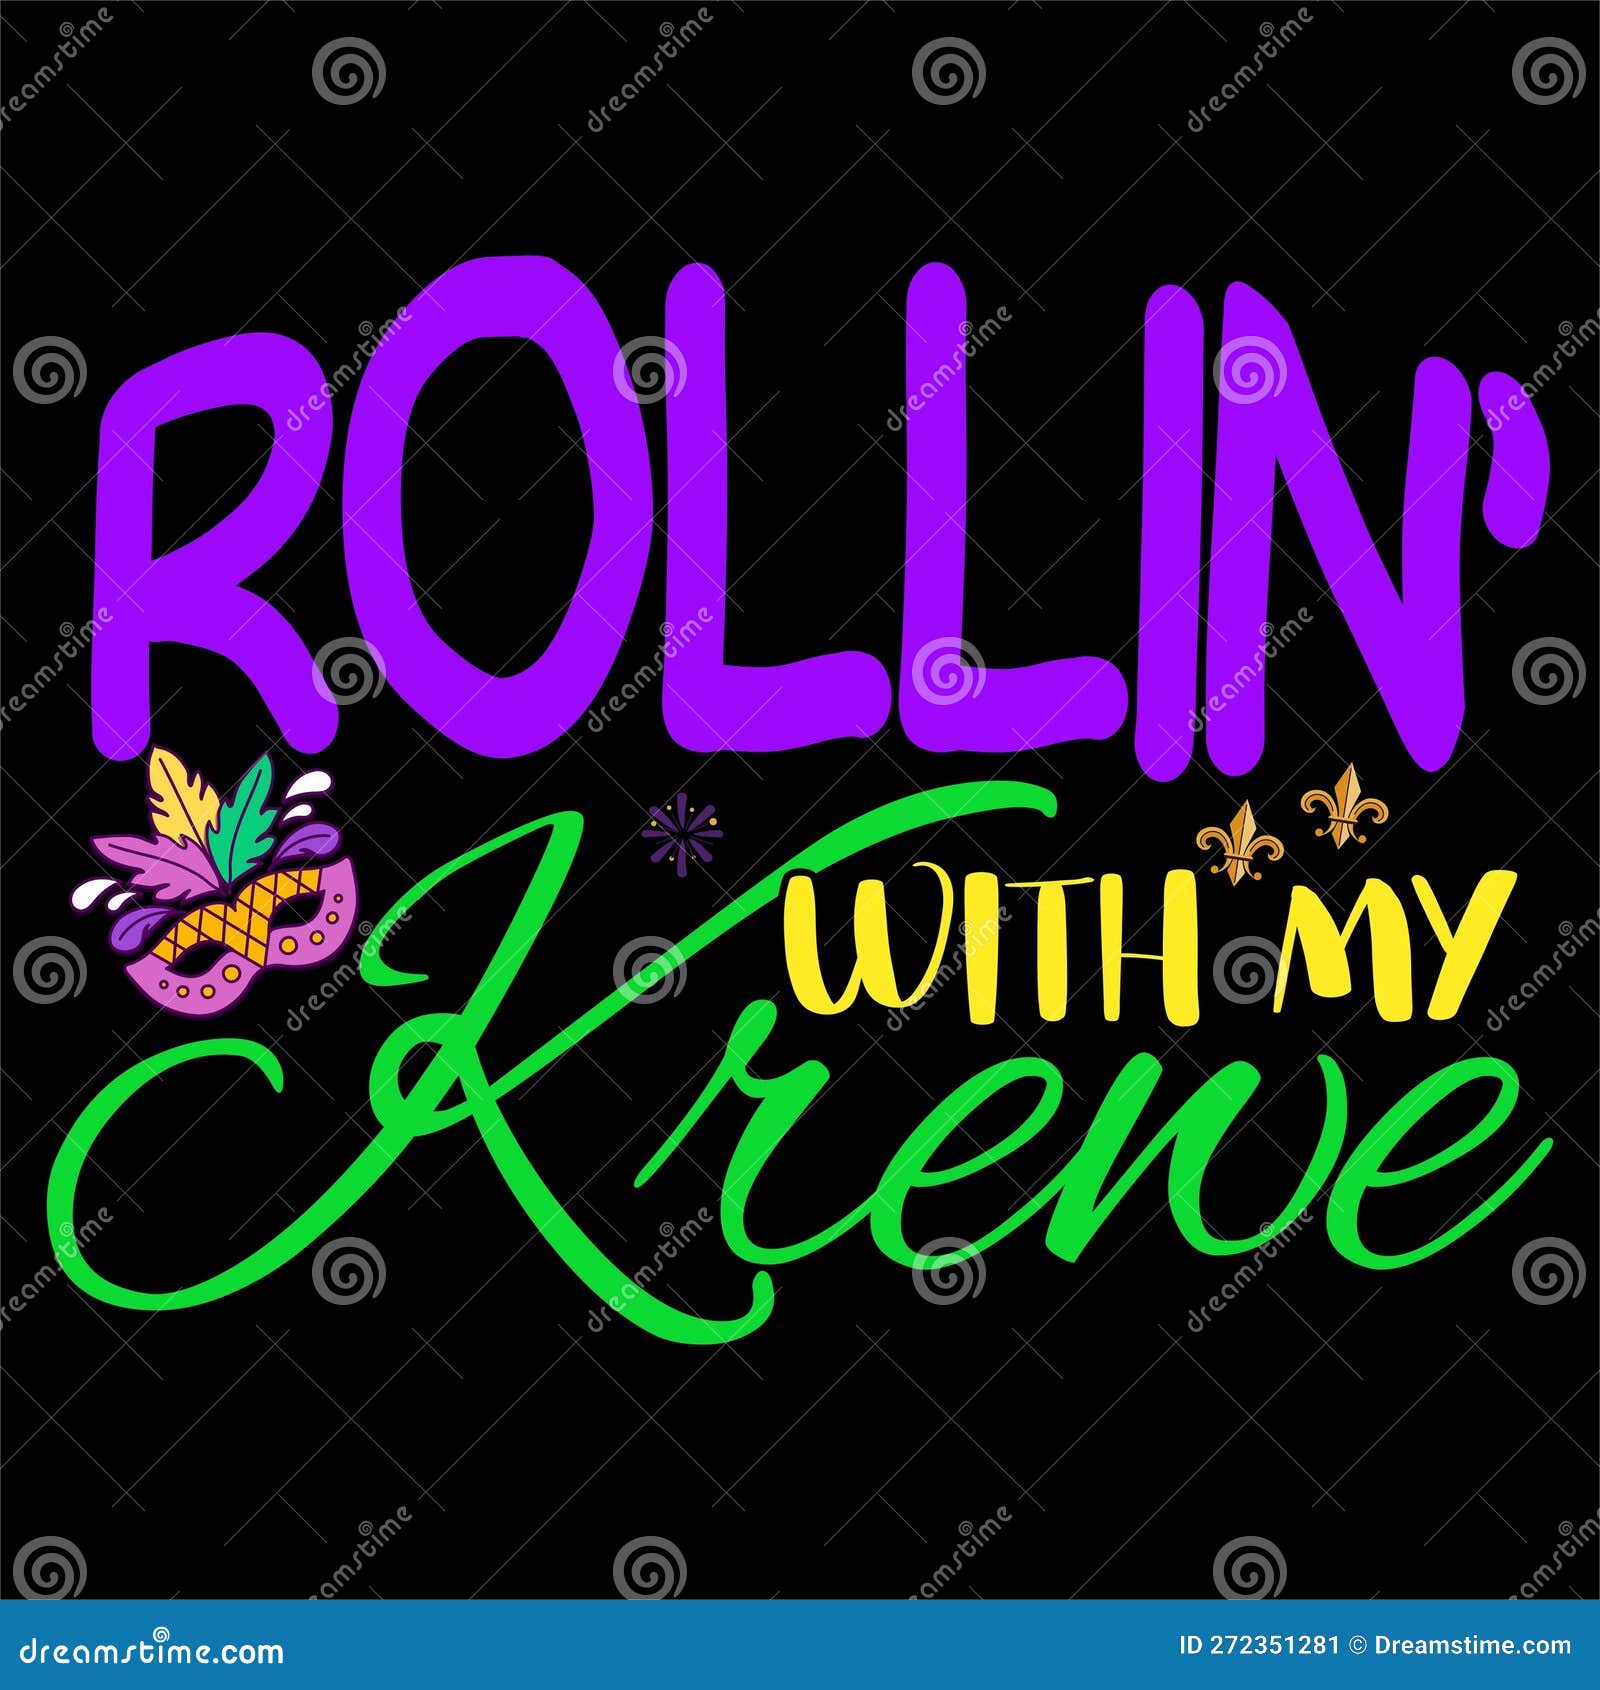 rollin with my krewe, typography  for carnival celebration